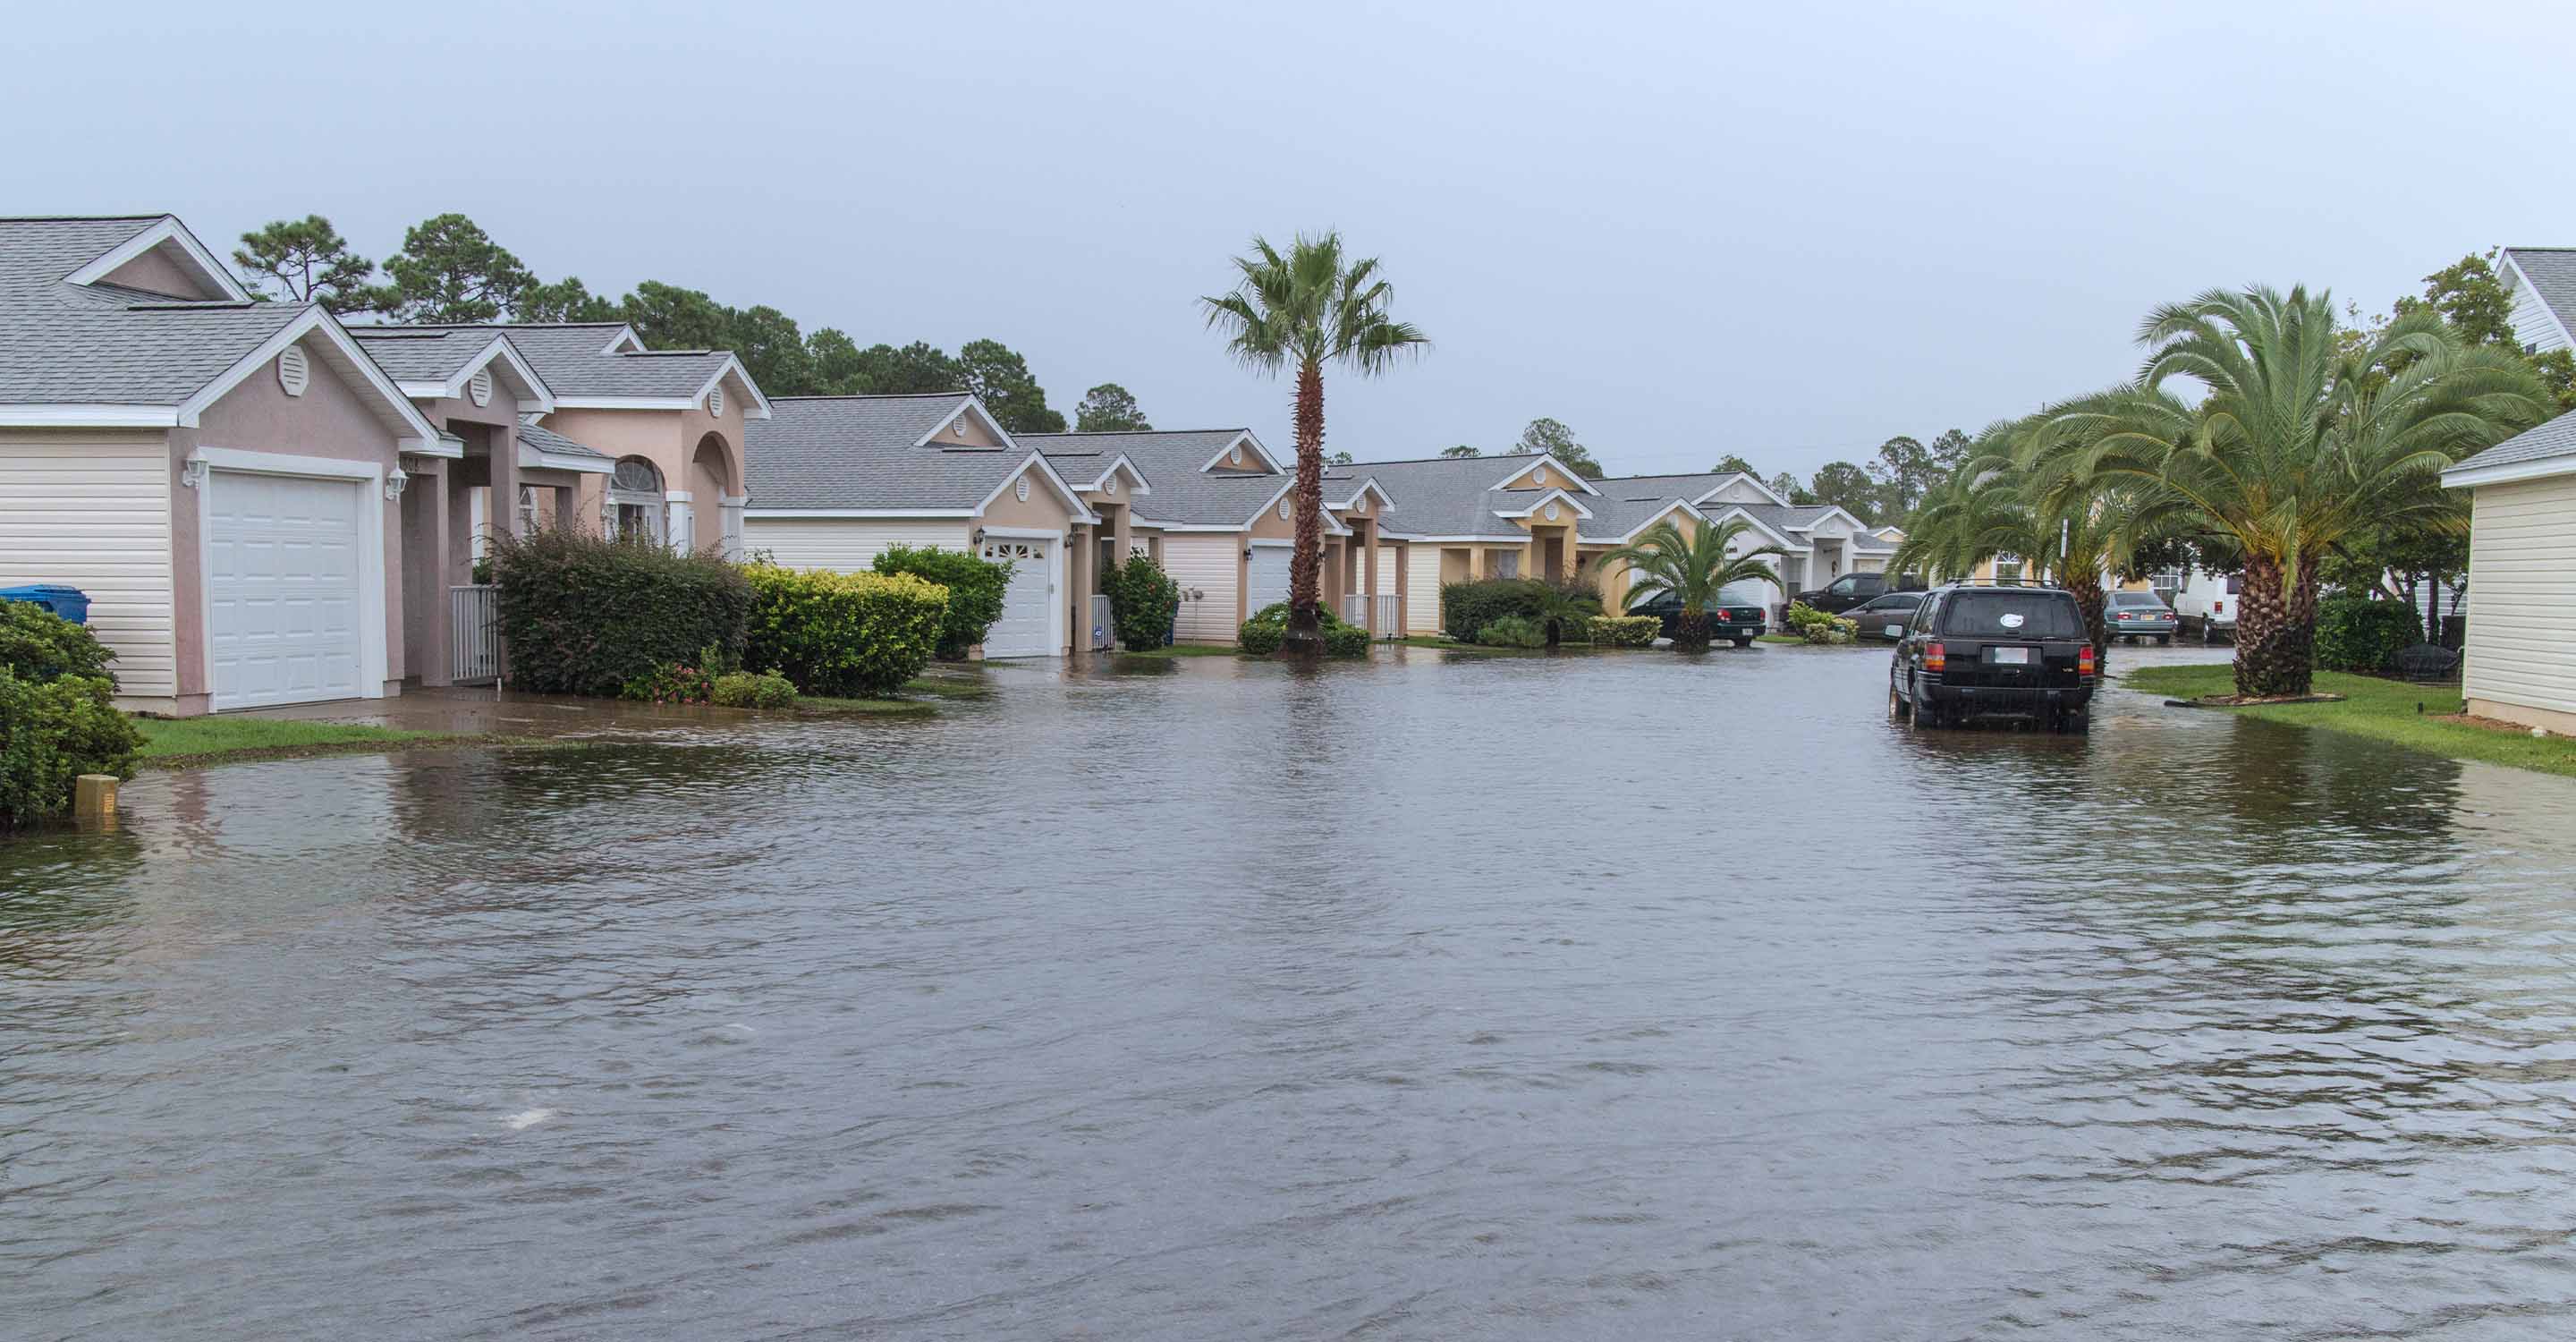 The thumbnail of a news article titled Indoor Air Quality Alert: Gulf Coast U.S. Flooding